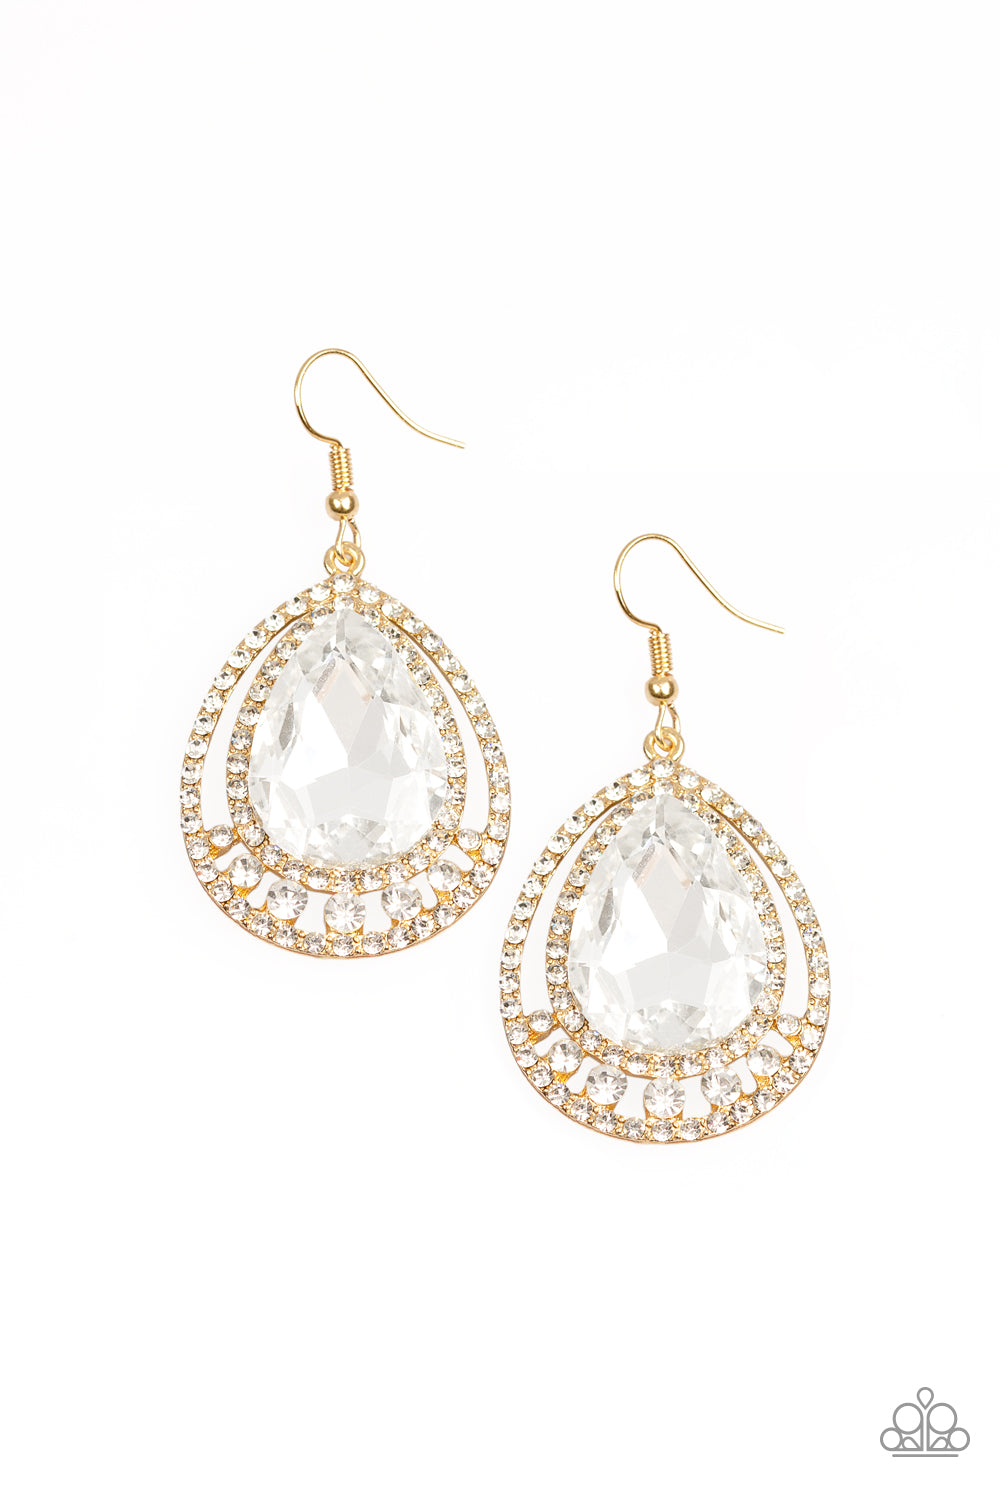 All Rise For Her Majesty Gold Paparazzi Earrings Cashmere Pink Jewels - Cashmere Pink Jewels & Accessories, Cashmere Pink Jewels & Accessories - Paparazzi